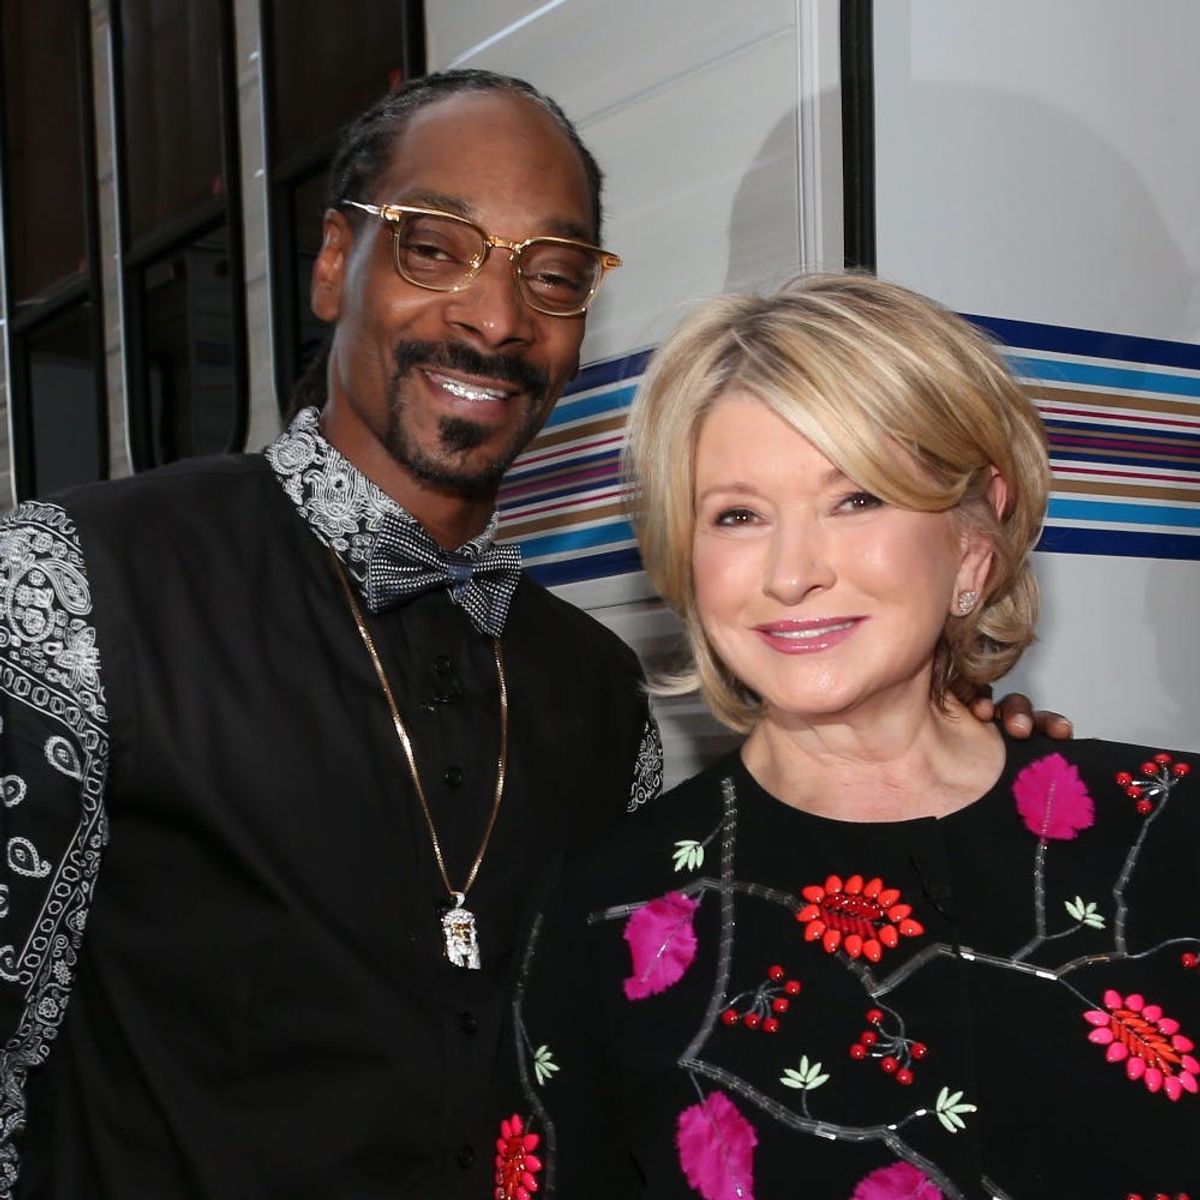 Martha Stewart and Snoop Dogg Are Hosting a New Cooking Show Together